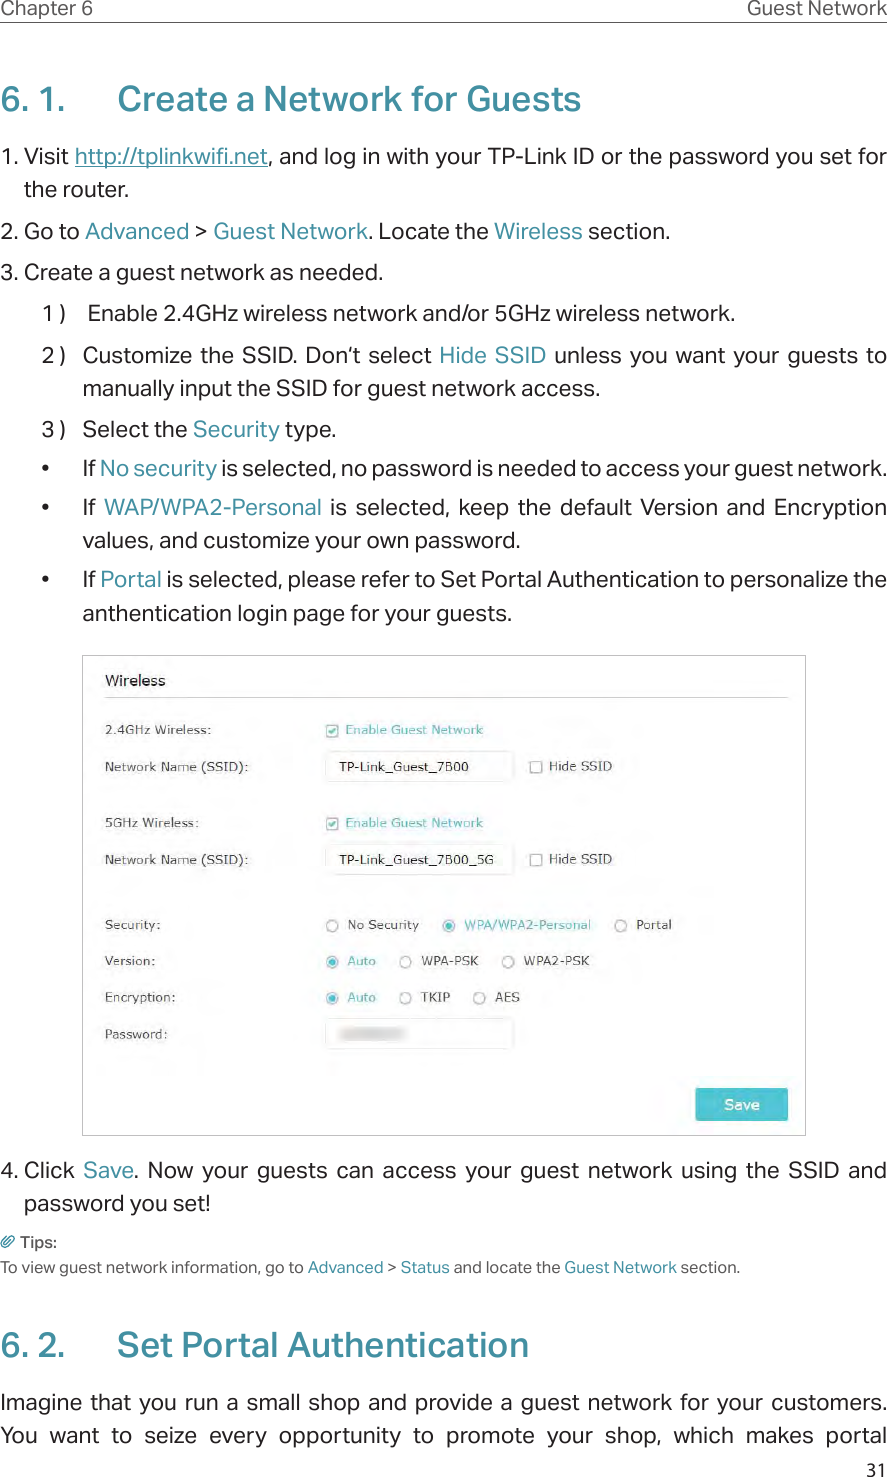 31Chapter 6 Guest Network6. 1.  Create a Network for Guests 1. Visit http://tplinkwifi.net, and log in with your TP-Link ID or the password you set for the router.2. Go to Advanced &gt; Guest Network. Locate the Wireless section.3. Create a guest network as needed.1 )   Enable 2.4GHz wireless network and/or 5GHz wireless network.2 )  Customize the SSID. Don‘t select Hide SSID unless you want your guests to manually input the SSID for guest network access.3 )  Select the Security type.• If No security is selected, no password is needed to access your guest network.• If WAP/WPA2-Personal is selected, keep the default Version and Encryption values, and customize your own password.• If Portal is selected, please refer to Set Portal Authentication to personalize the anthentication login page for your guests. 4. Click  Save. Now your guests can access your guest network using the SSID and password you set!Tips:To view guest network information, go to Advanced &gt; Status and locate the Guest Network section.6. 2.  Set Portal AuthenticationImagine that you run a small shop and provide a guest network for your customers. You want to seize every opportunity to promote your shop, which makes portal 